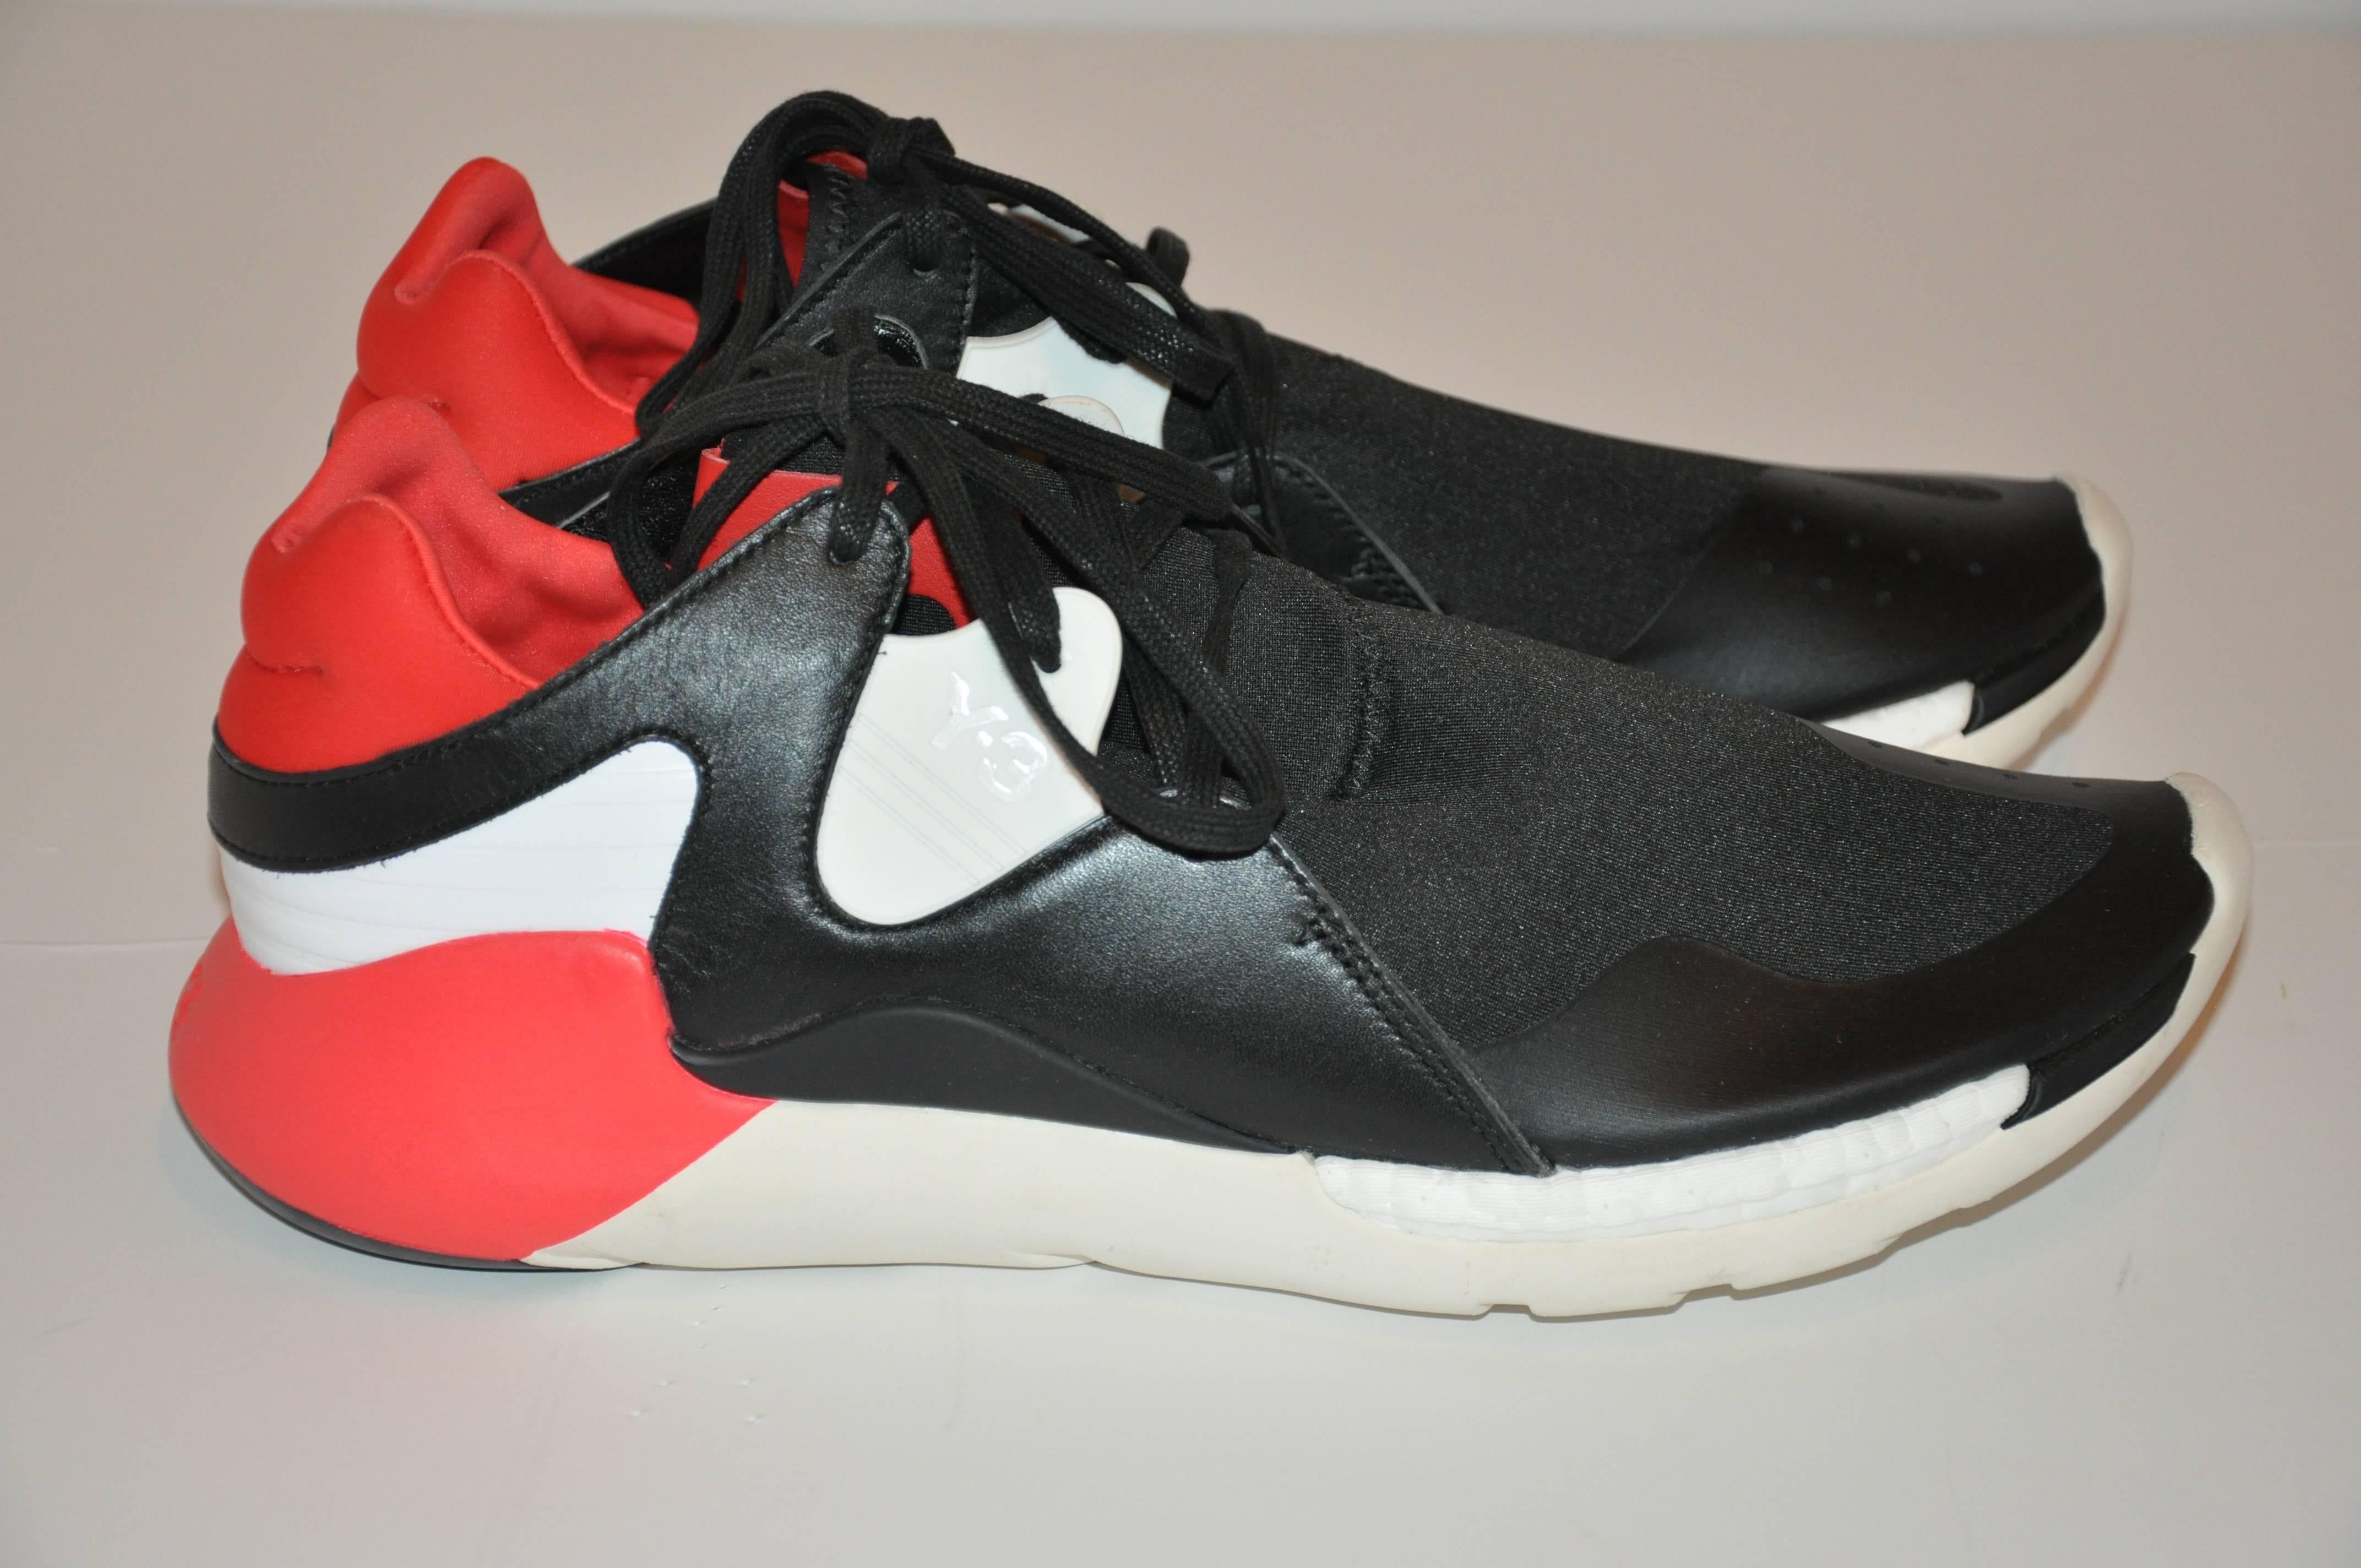         Yohji Yamamoto men's multi-colors of black, white and accented with bold neon red with lace-up rubber sneakers measures 12 1/2